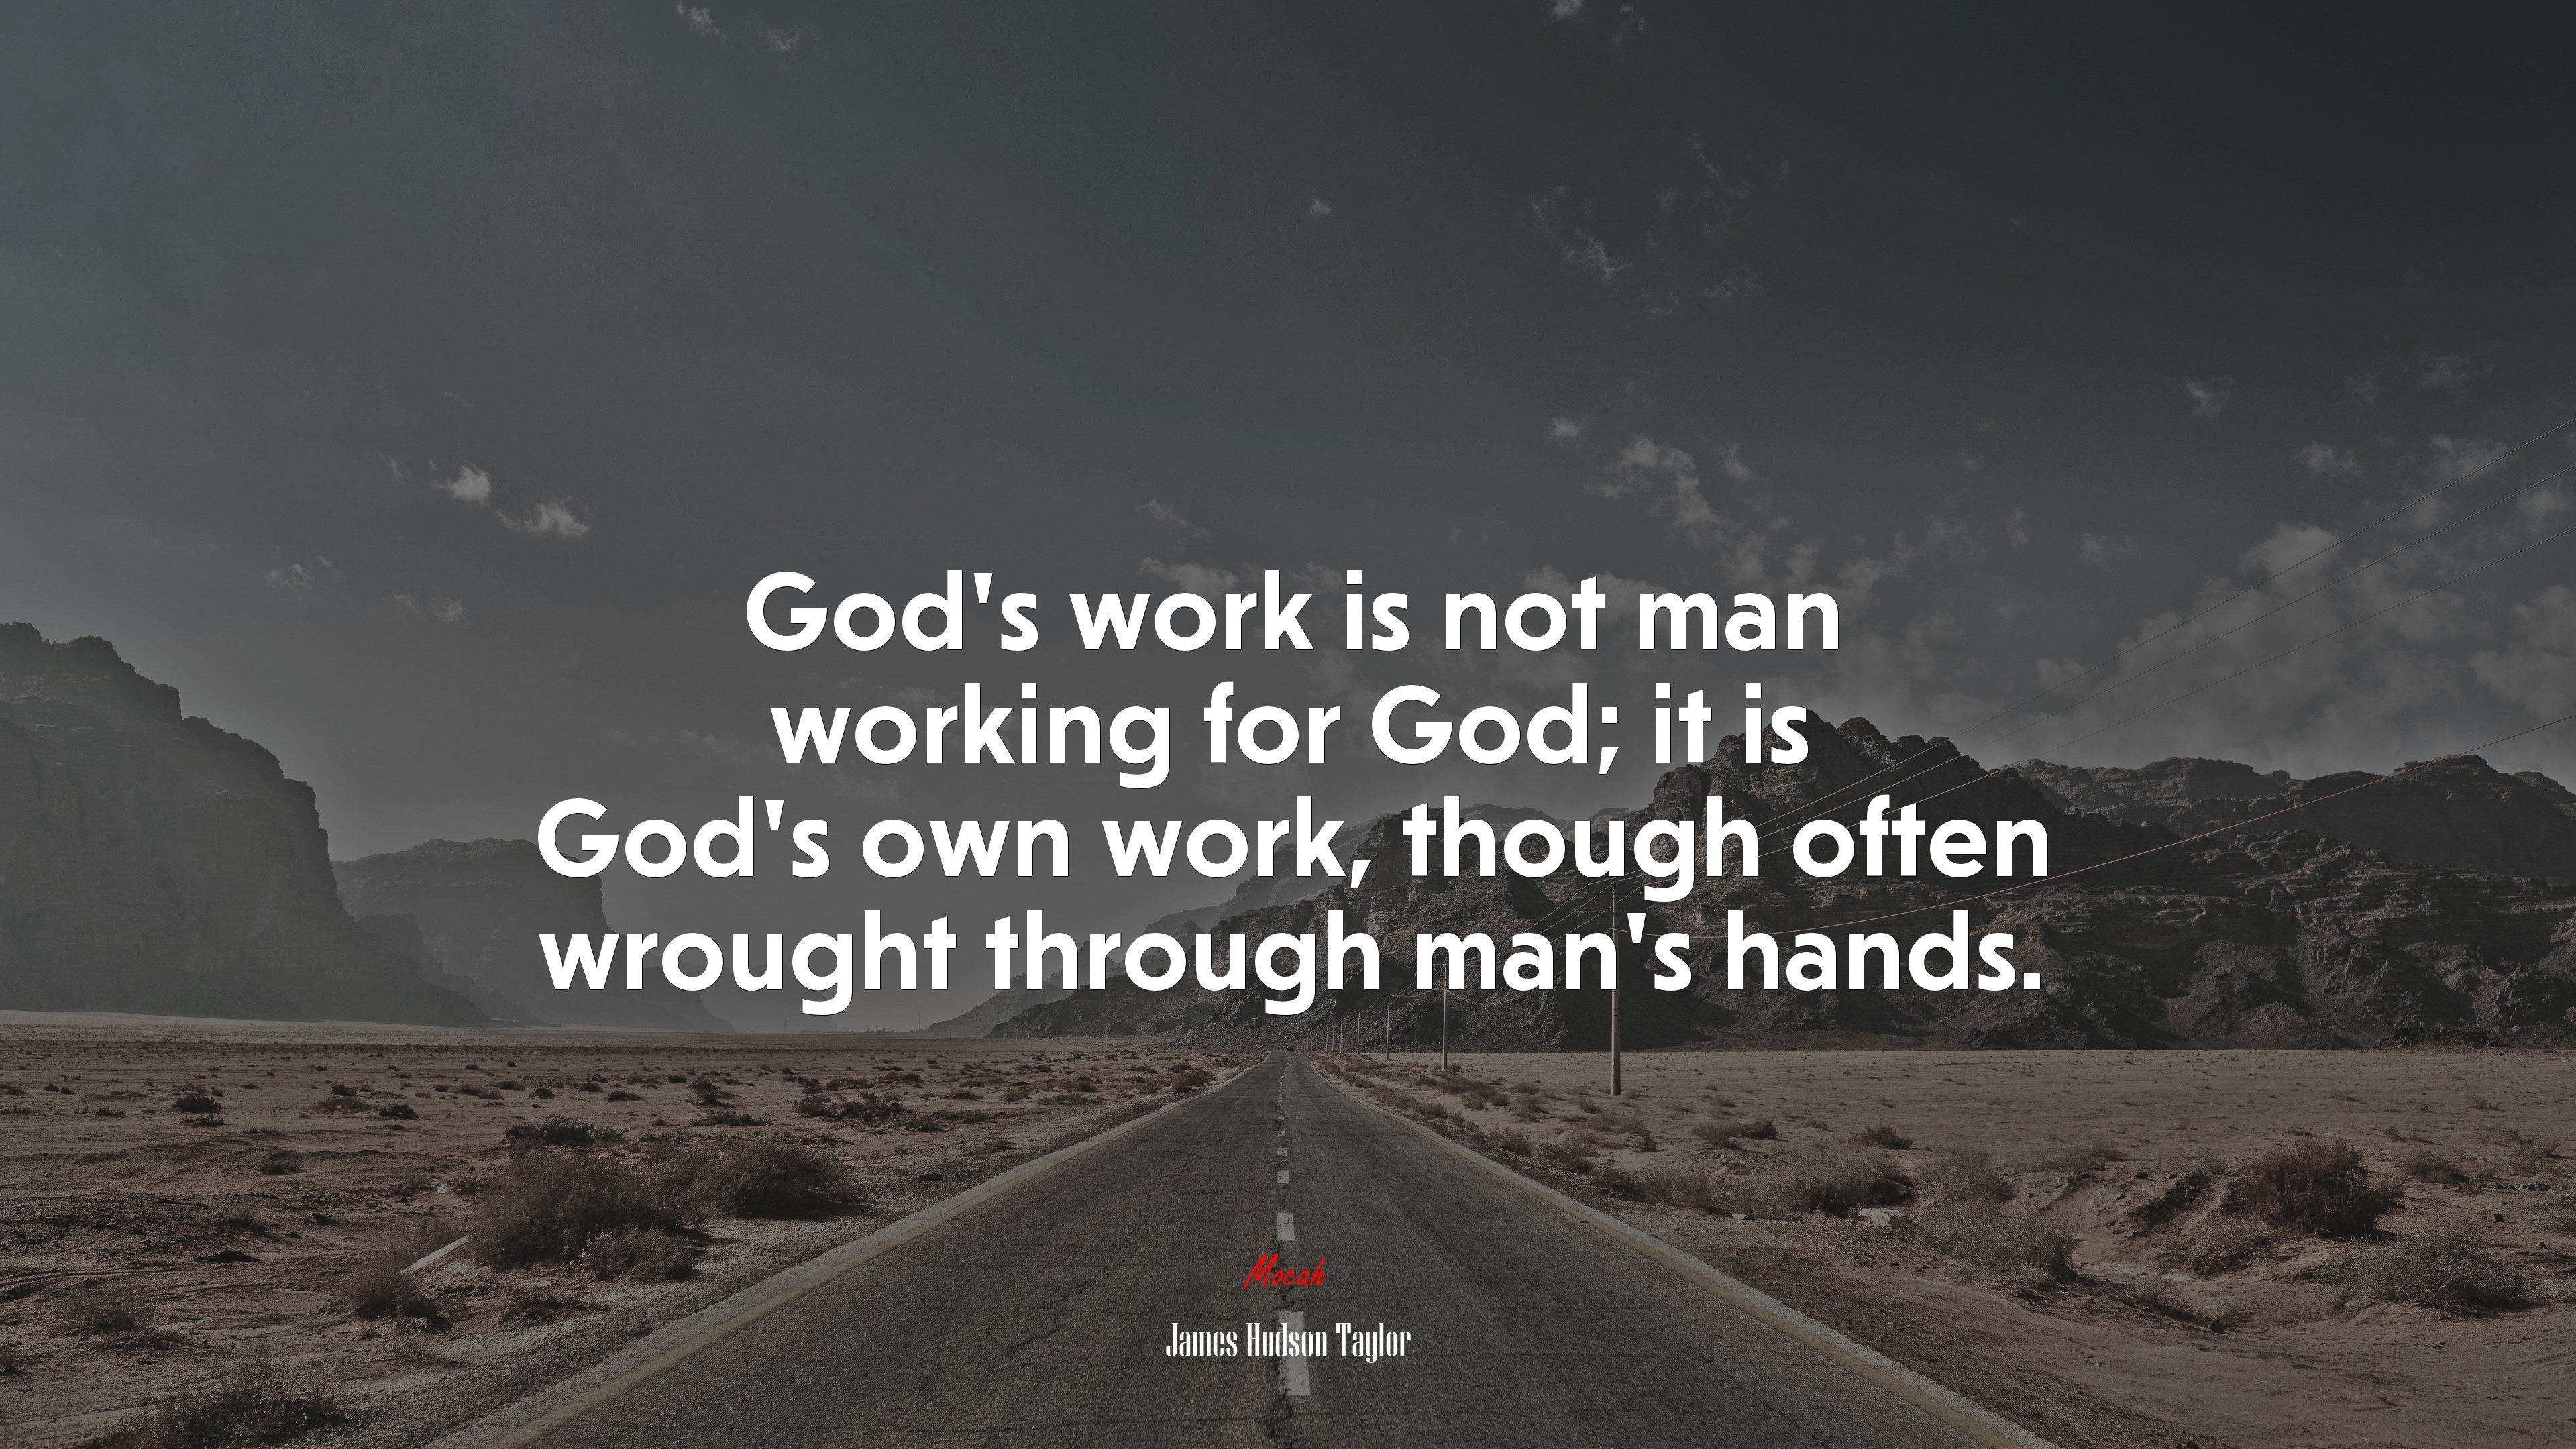 God's work is not man working for God; it is God's own work, though often wrought through man's hands. James Hudson Taylor quote, 4k wallpaper. Mocah.org HD Desktop Wallpaper